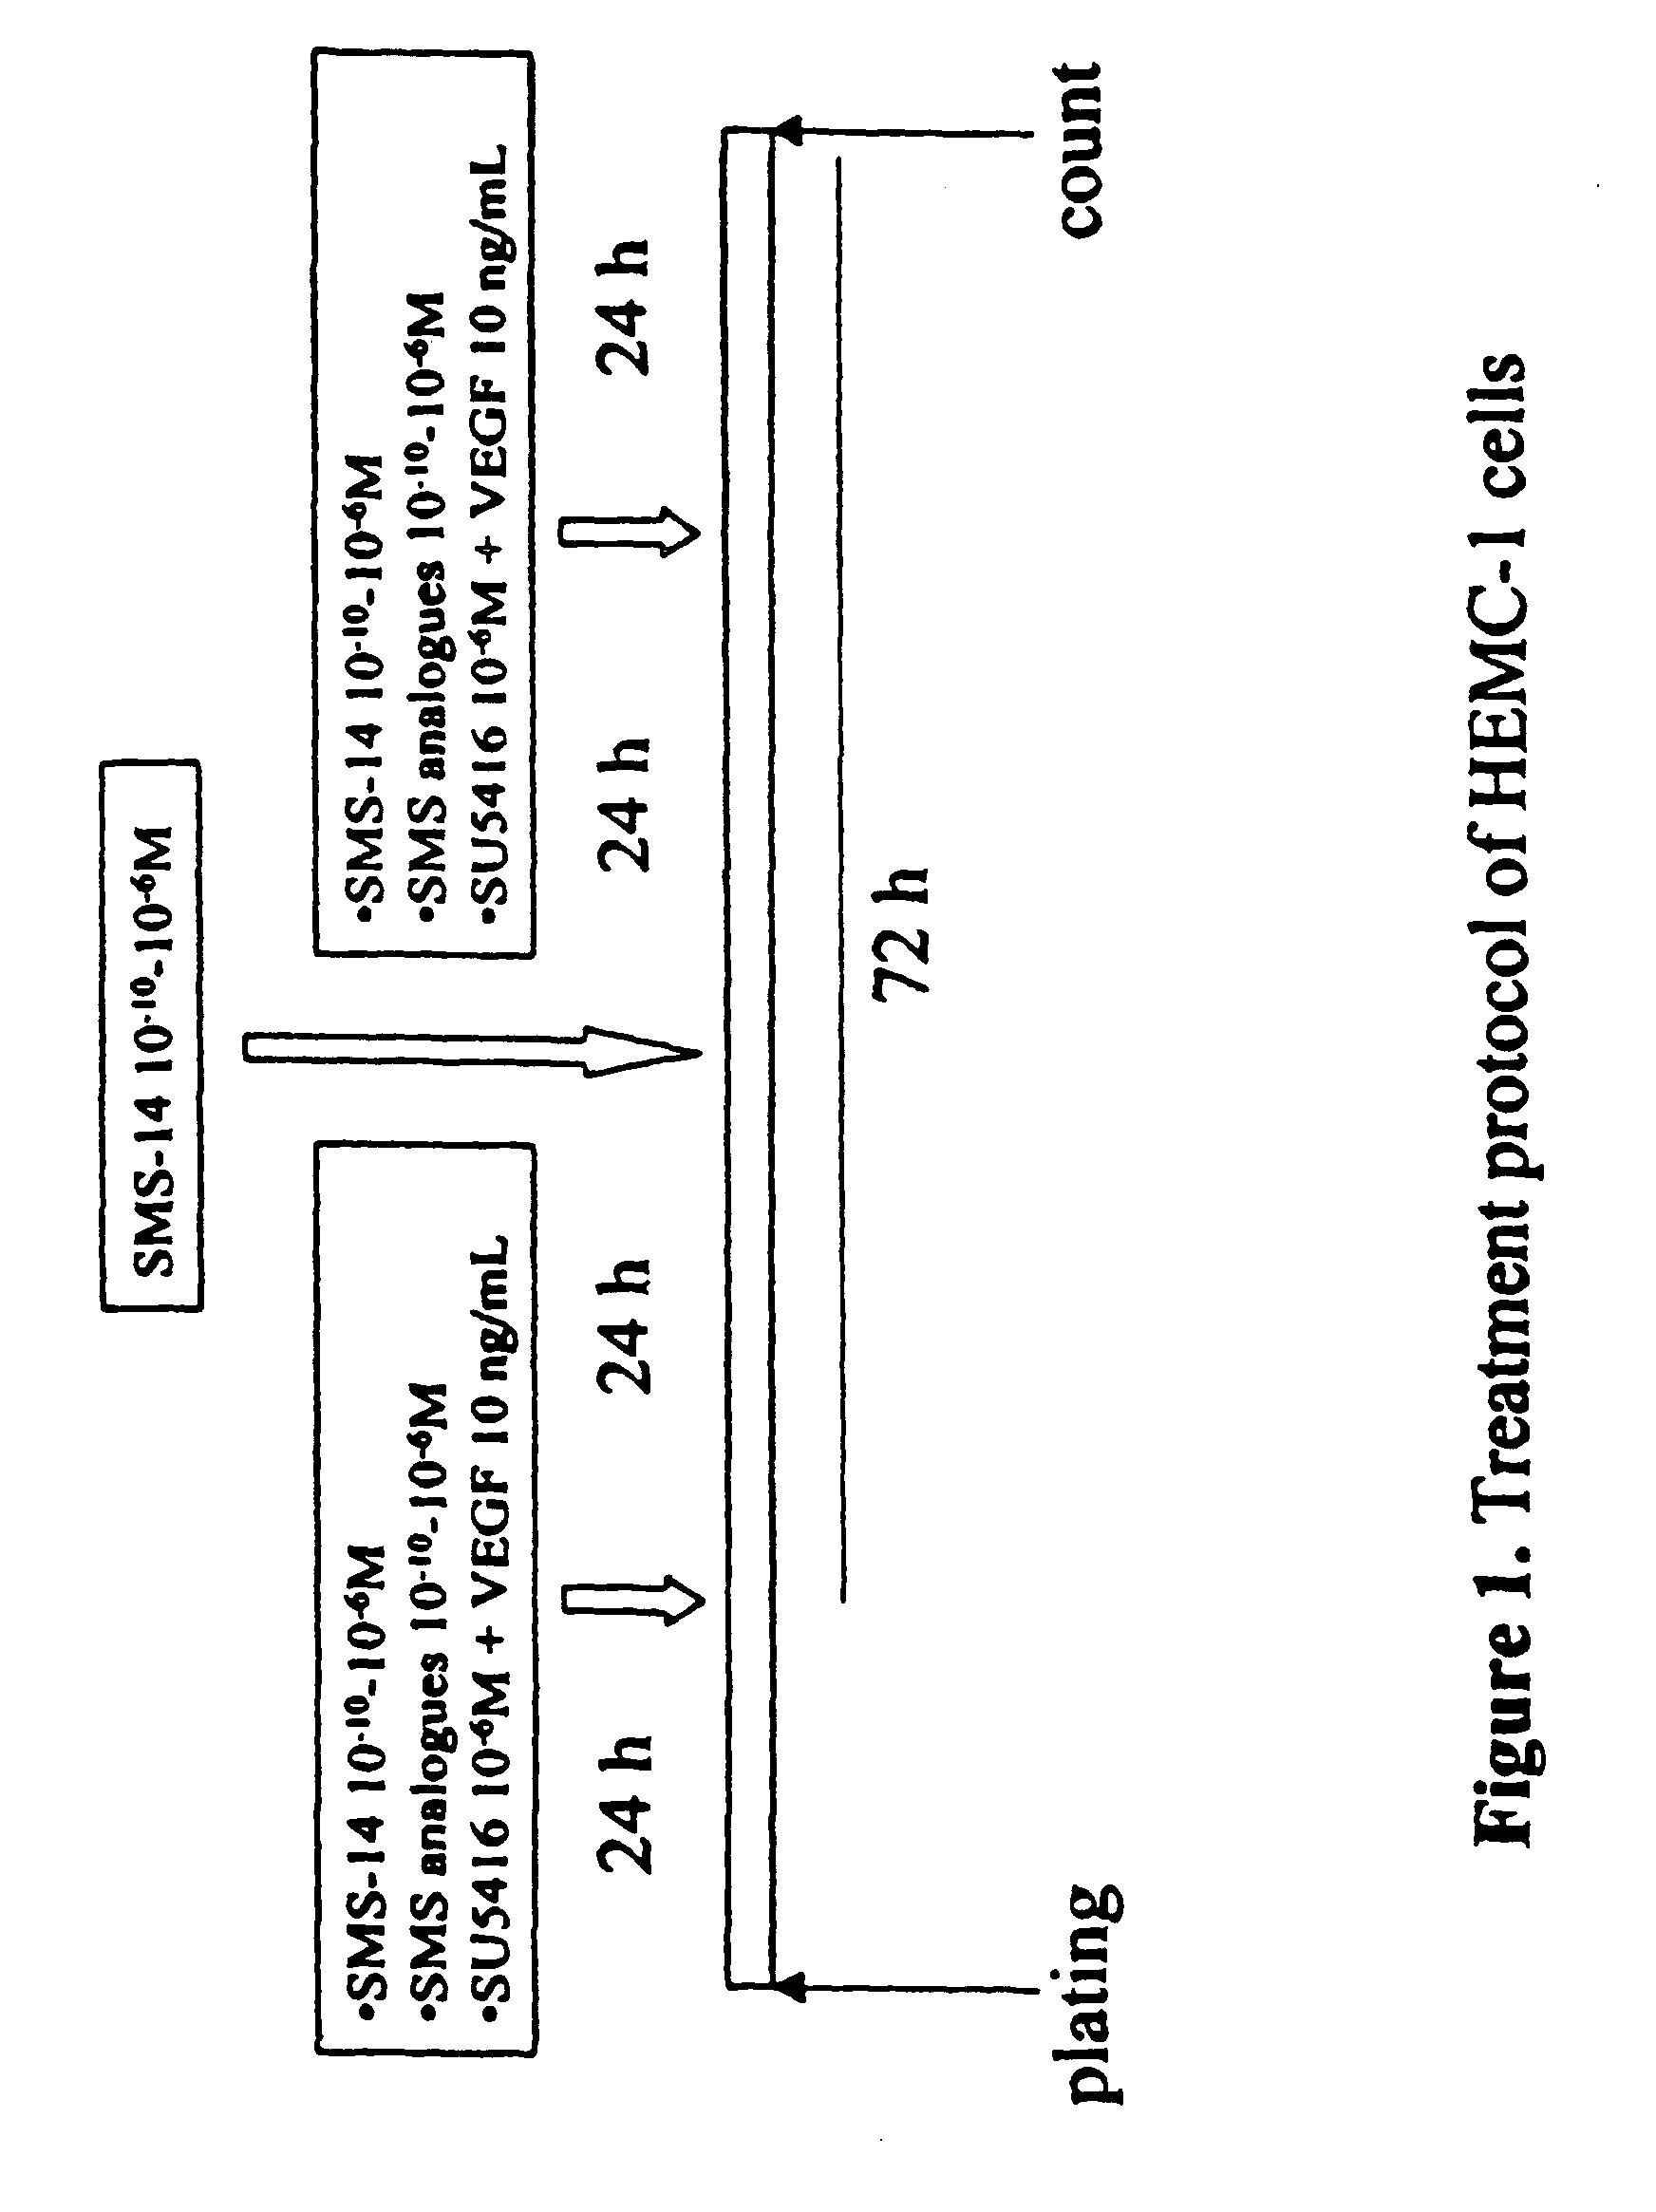 Pharmaceutical compositions which inhibit vascular proliferation and method of use thereof